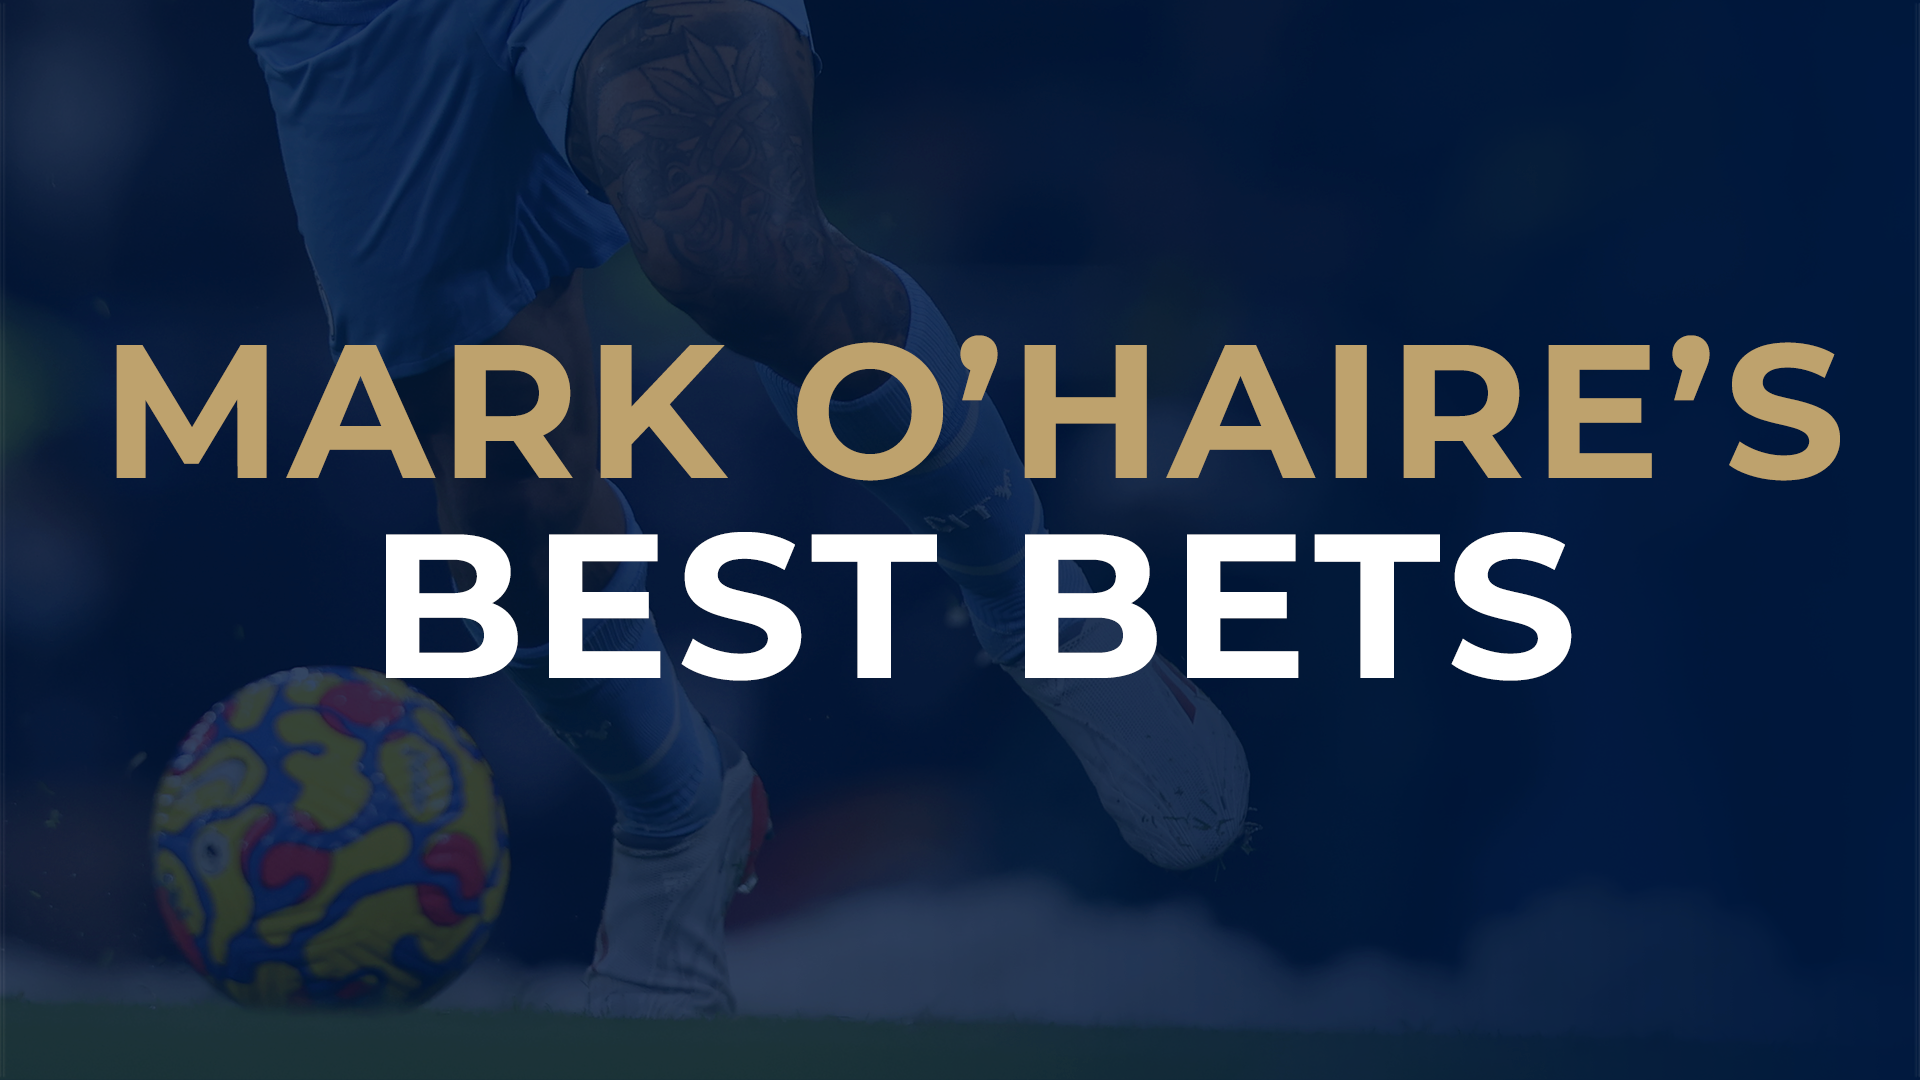 Football betting tips saturday in the park goal betting strategies martingale